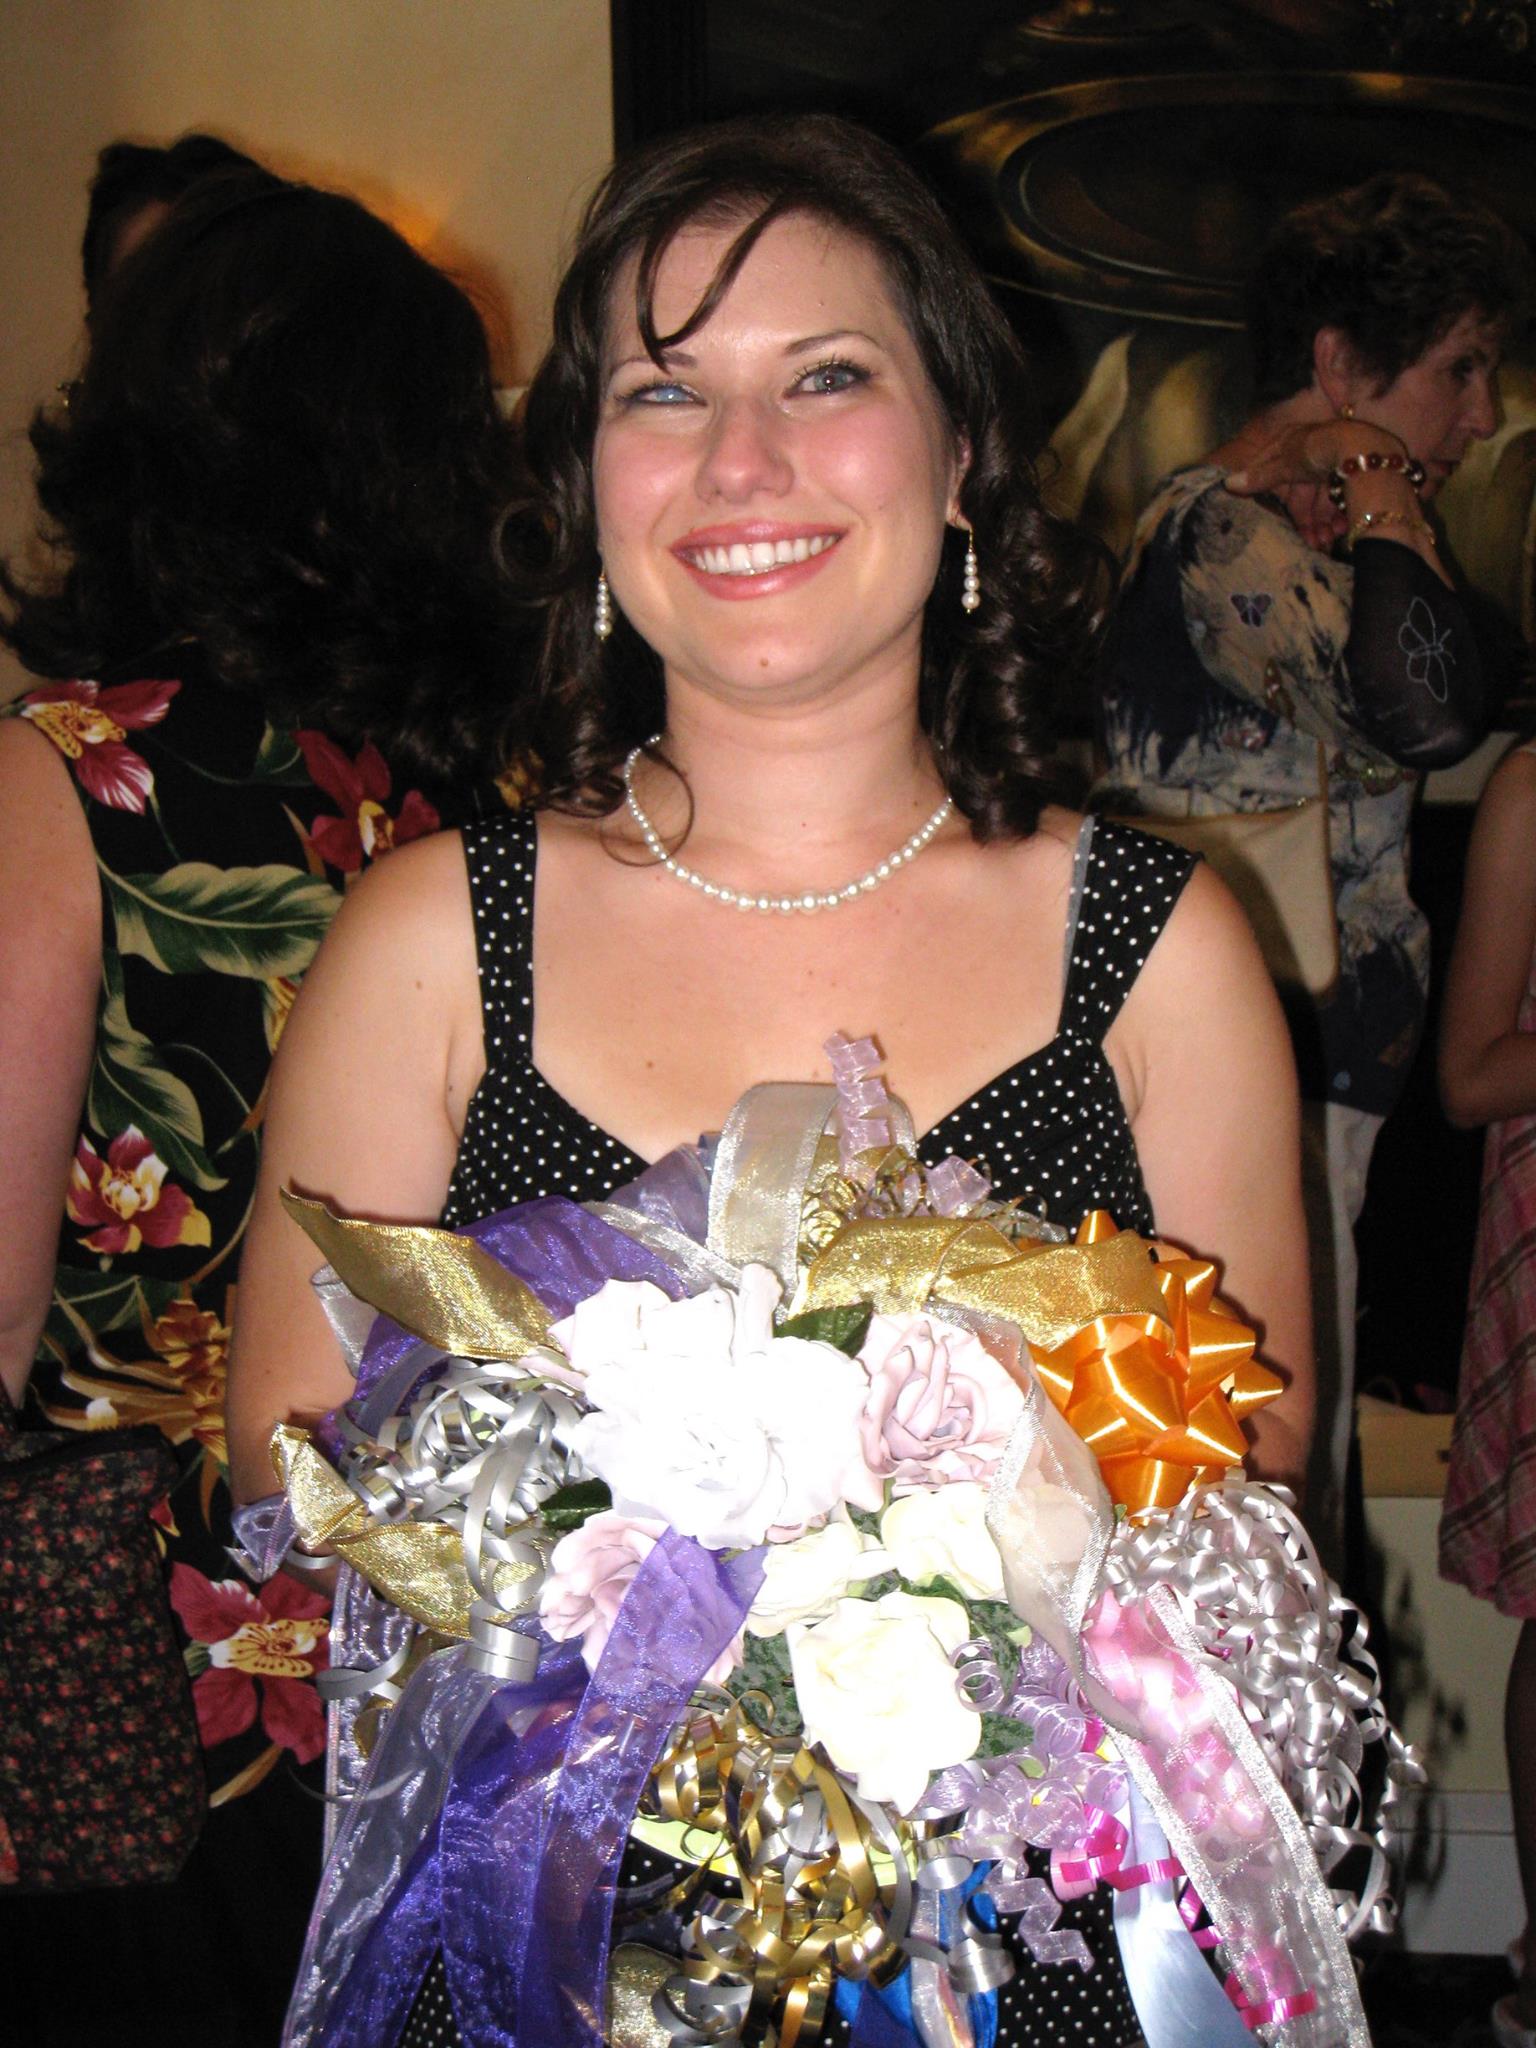 author with flowers